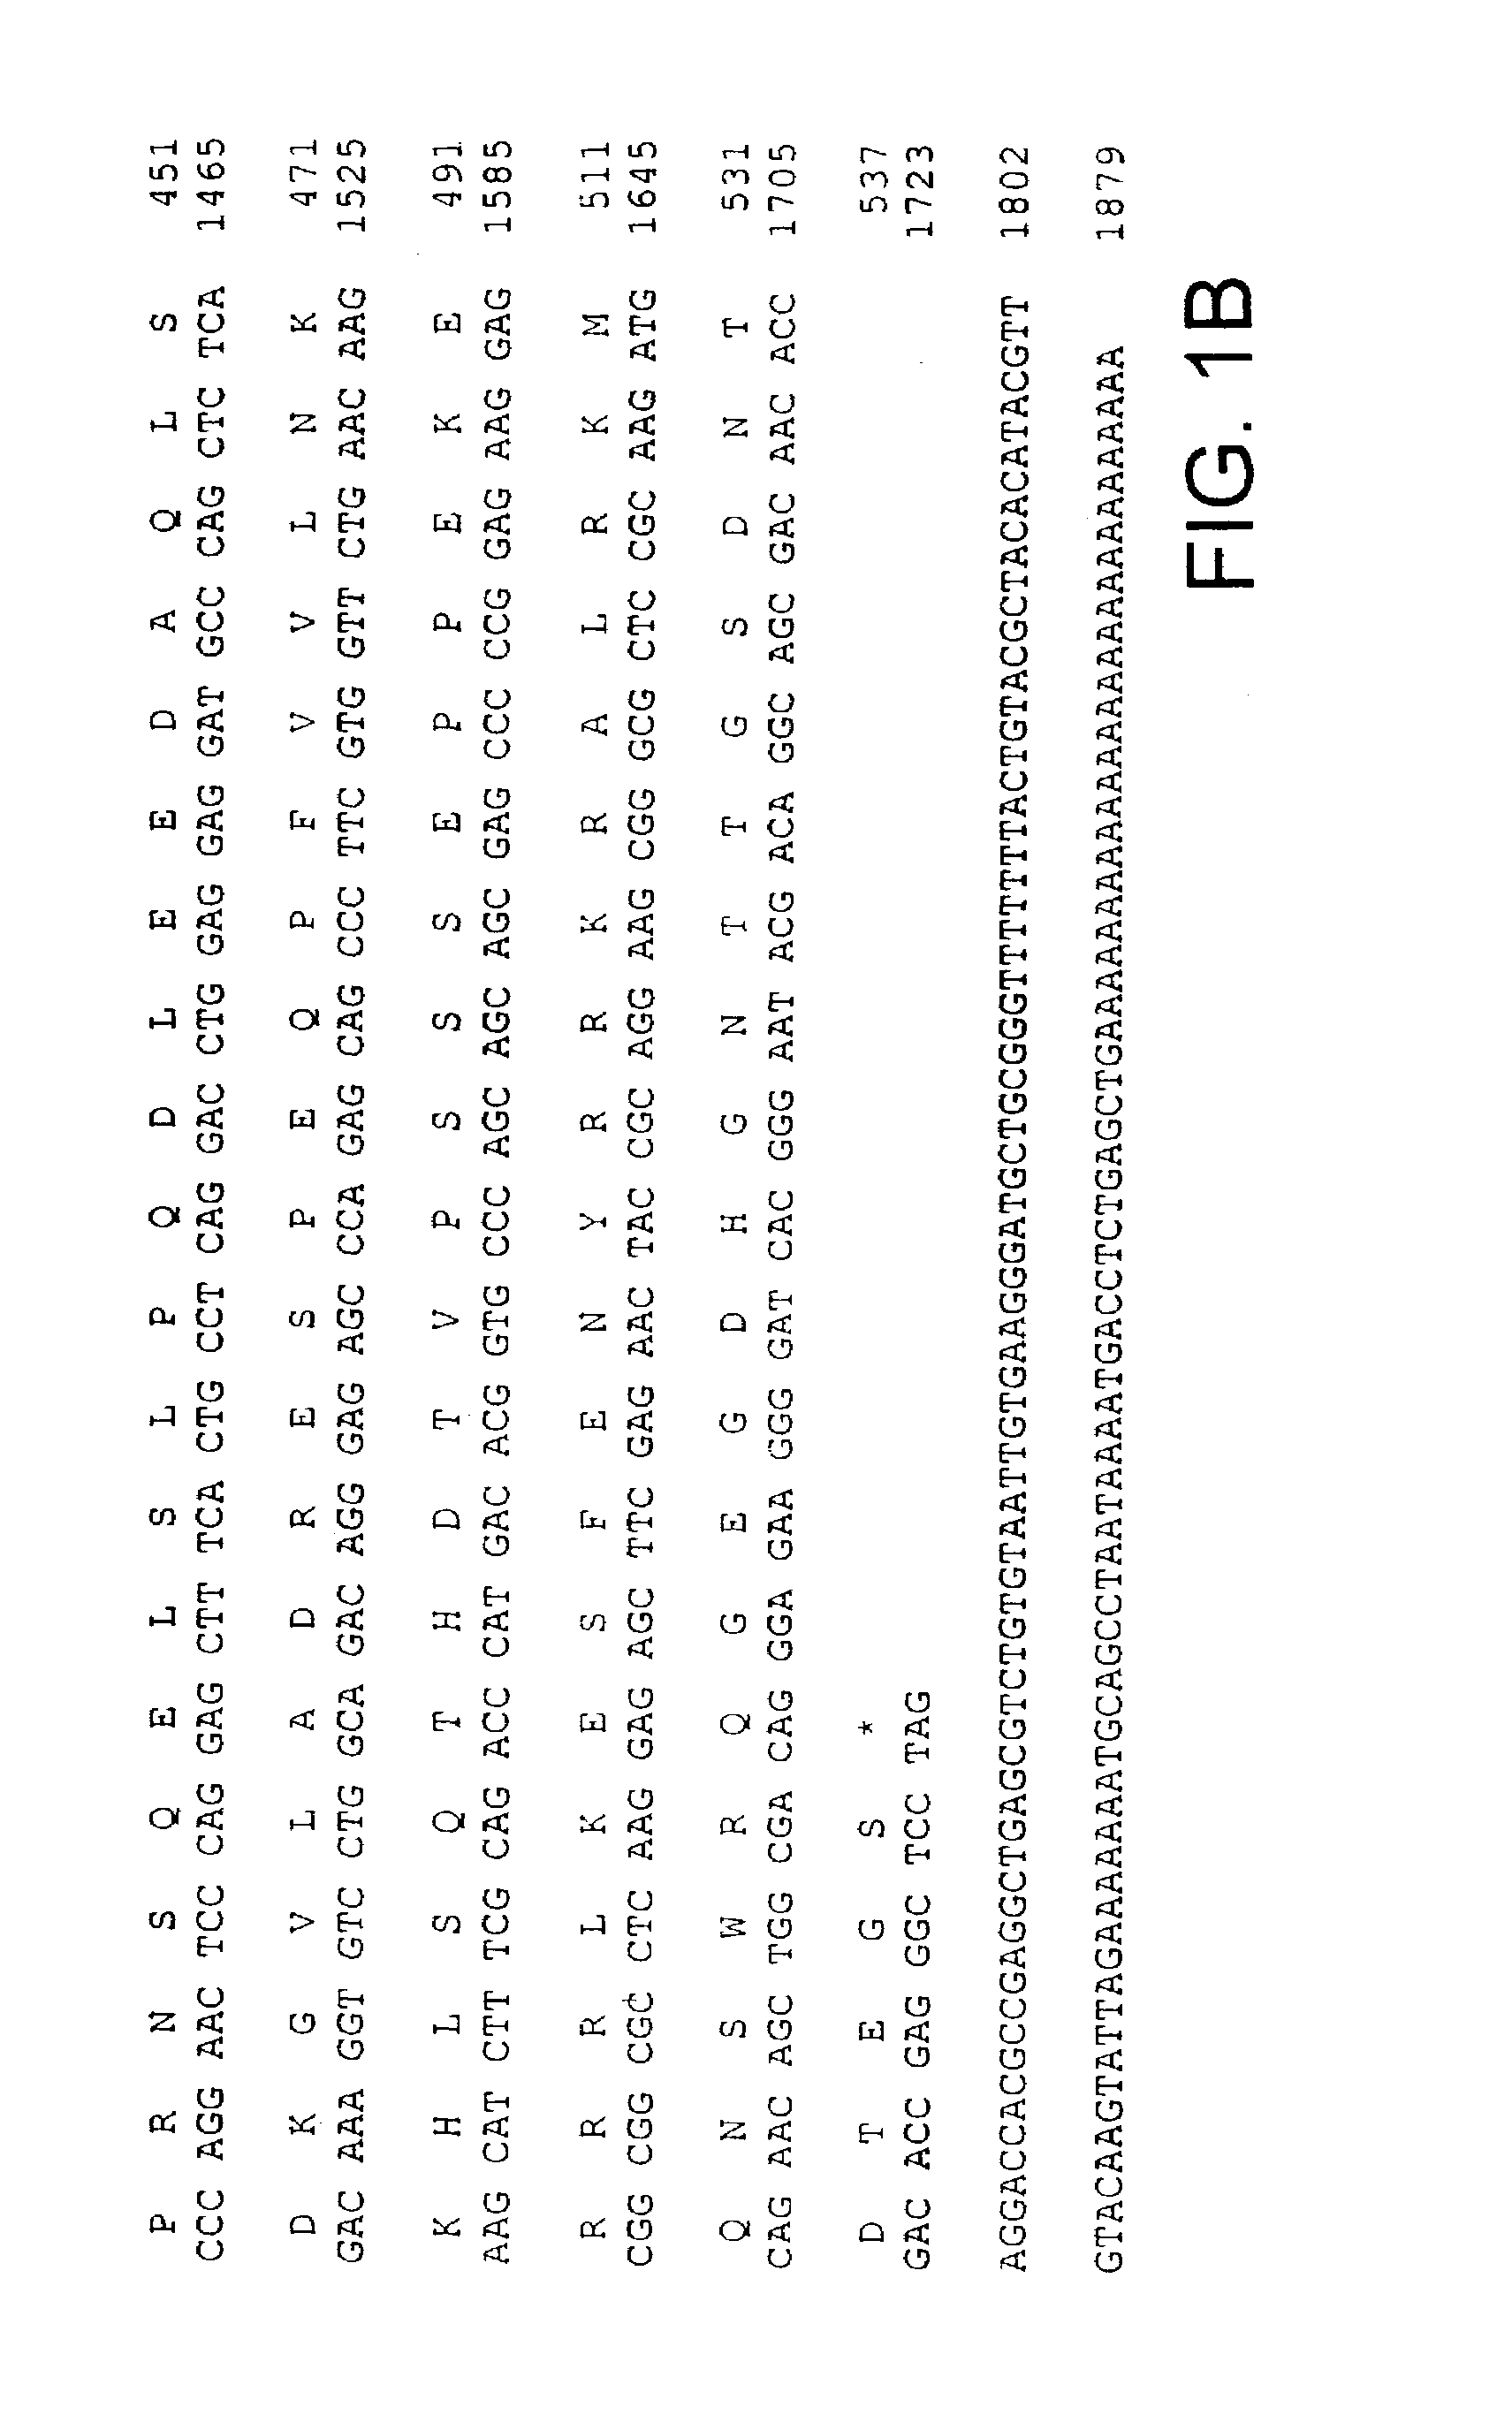 Molecules of the card-related protein family and uses thereof